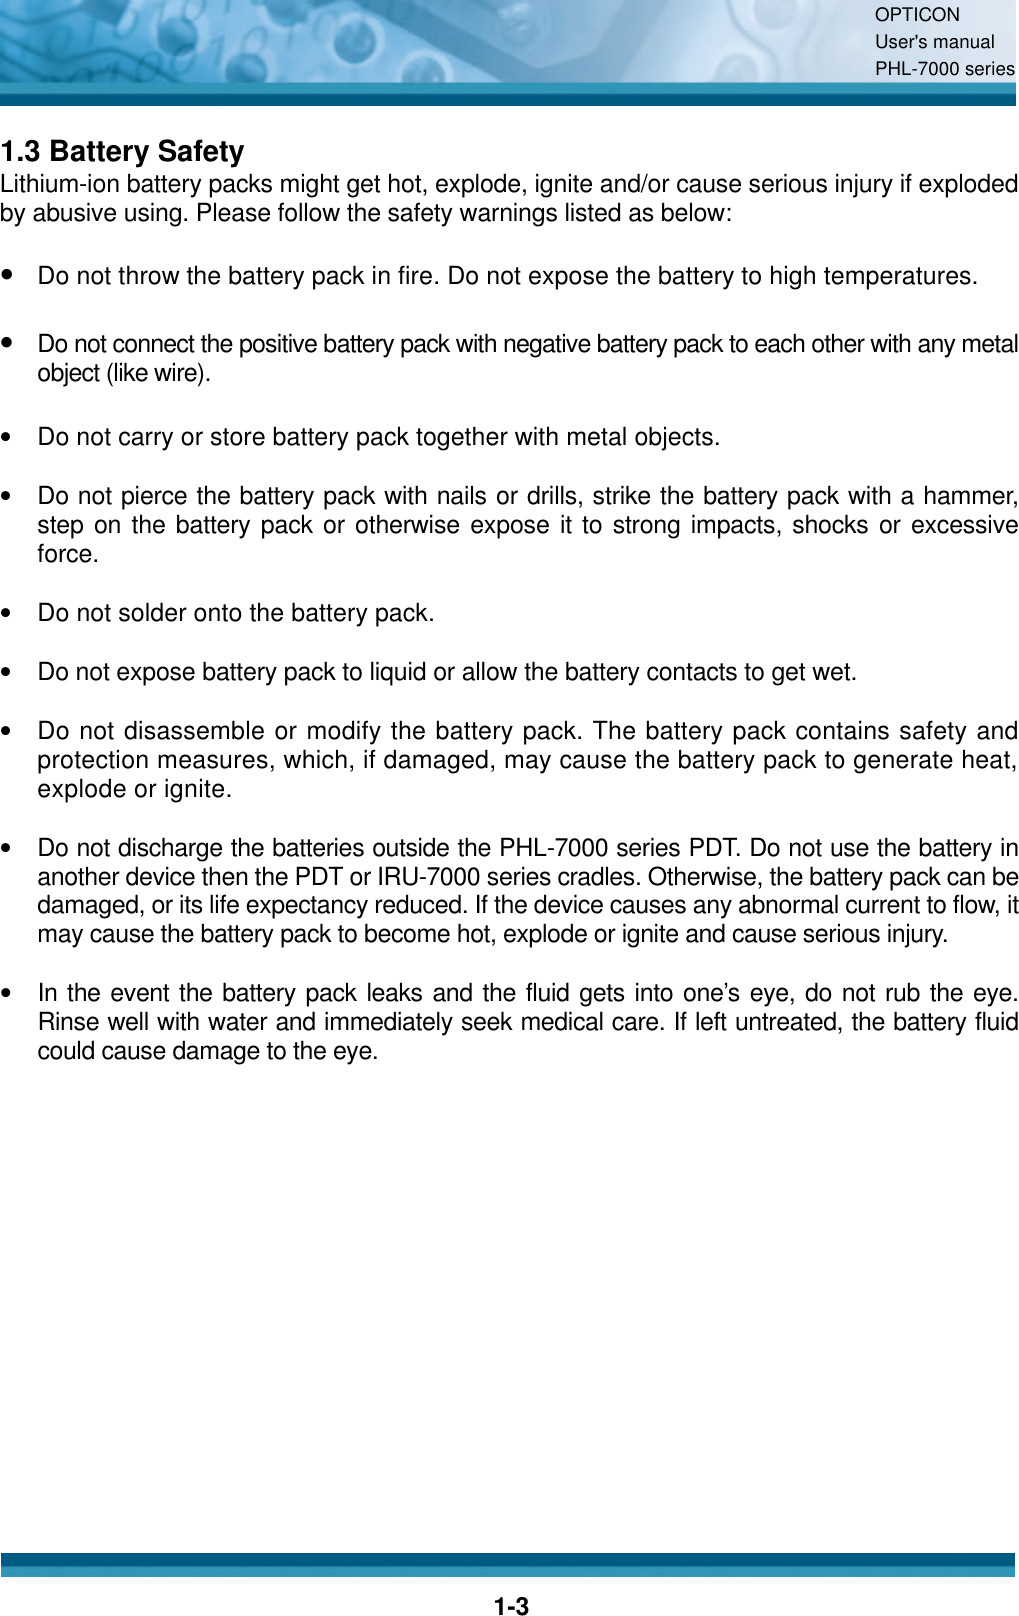 OPTICON User&apos;s manual PHL-7000 series    1-3 1.3 Battery Safety Lithium-ion battery packs might get hot, explode, ignite and/or cause serious injury if exploded by abusive using. Please follow the safety warnings listed as below:  • Do not throw the battery pack in fire. Do not expose the battery to high temperatures.  • Do not connect the positive battery pack with negative battery pack to each other with any metal object (like wire).  •  Do not carry or store battery pack together with metal objects.  •  Do not pierce the battery pack with nails or drills, strike the battery pack with a hammer, step on the battery pack or otherwise expose it to strong impacts, shocks or excessive force.  •  Do not solder onto the battery pack.  •  Do not expose battery pack to liquid or allow the battery contacts to get wet.  •  Do not disassemble or modify the battery pack. The battery pack contains safety and protection measures, which, if damaged, may cause the battery pack to generate heat, explode or ignite.  •  Do not discharge the batteries outside the PHL-7000 series PDT. Do not use the battery in another device then the PDT or IRU-7000 series cradles. Otherwise, the battery pack can be damaged, or its life expectancy reduced. If the device causes any abnormal current to flow, it may cause the battery pack to become hot, explode or ignite and cause serious injury.  •  In the event the battery pack leaks and the fluid gets into one’s eye, do not rub the eye. Rinse well with water and immediately seek medical care. If left untreated, the battery fluid could cause damage to the eye.   